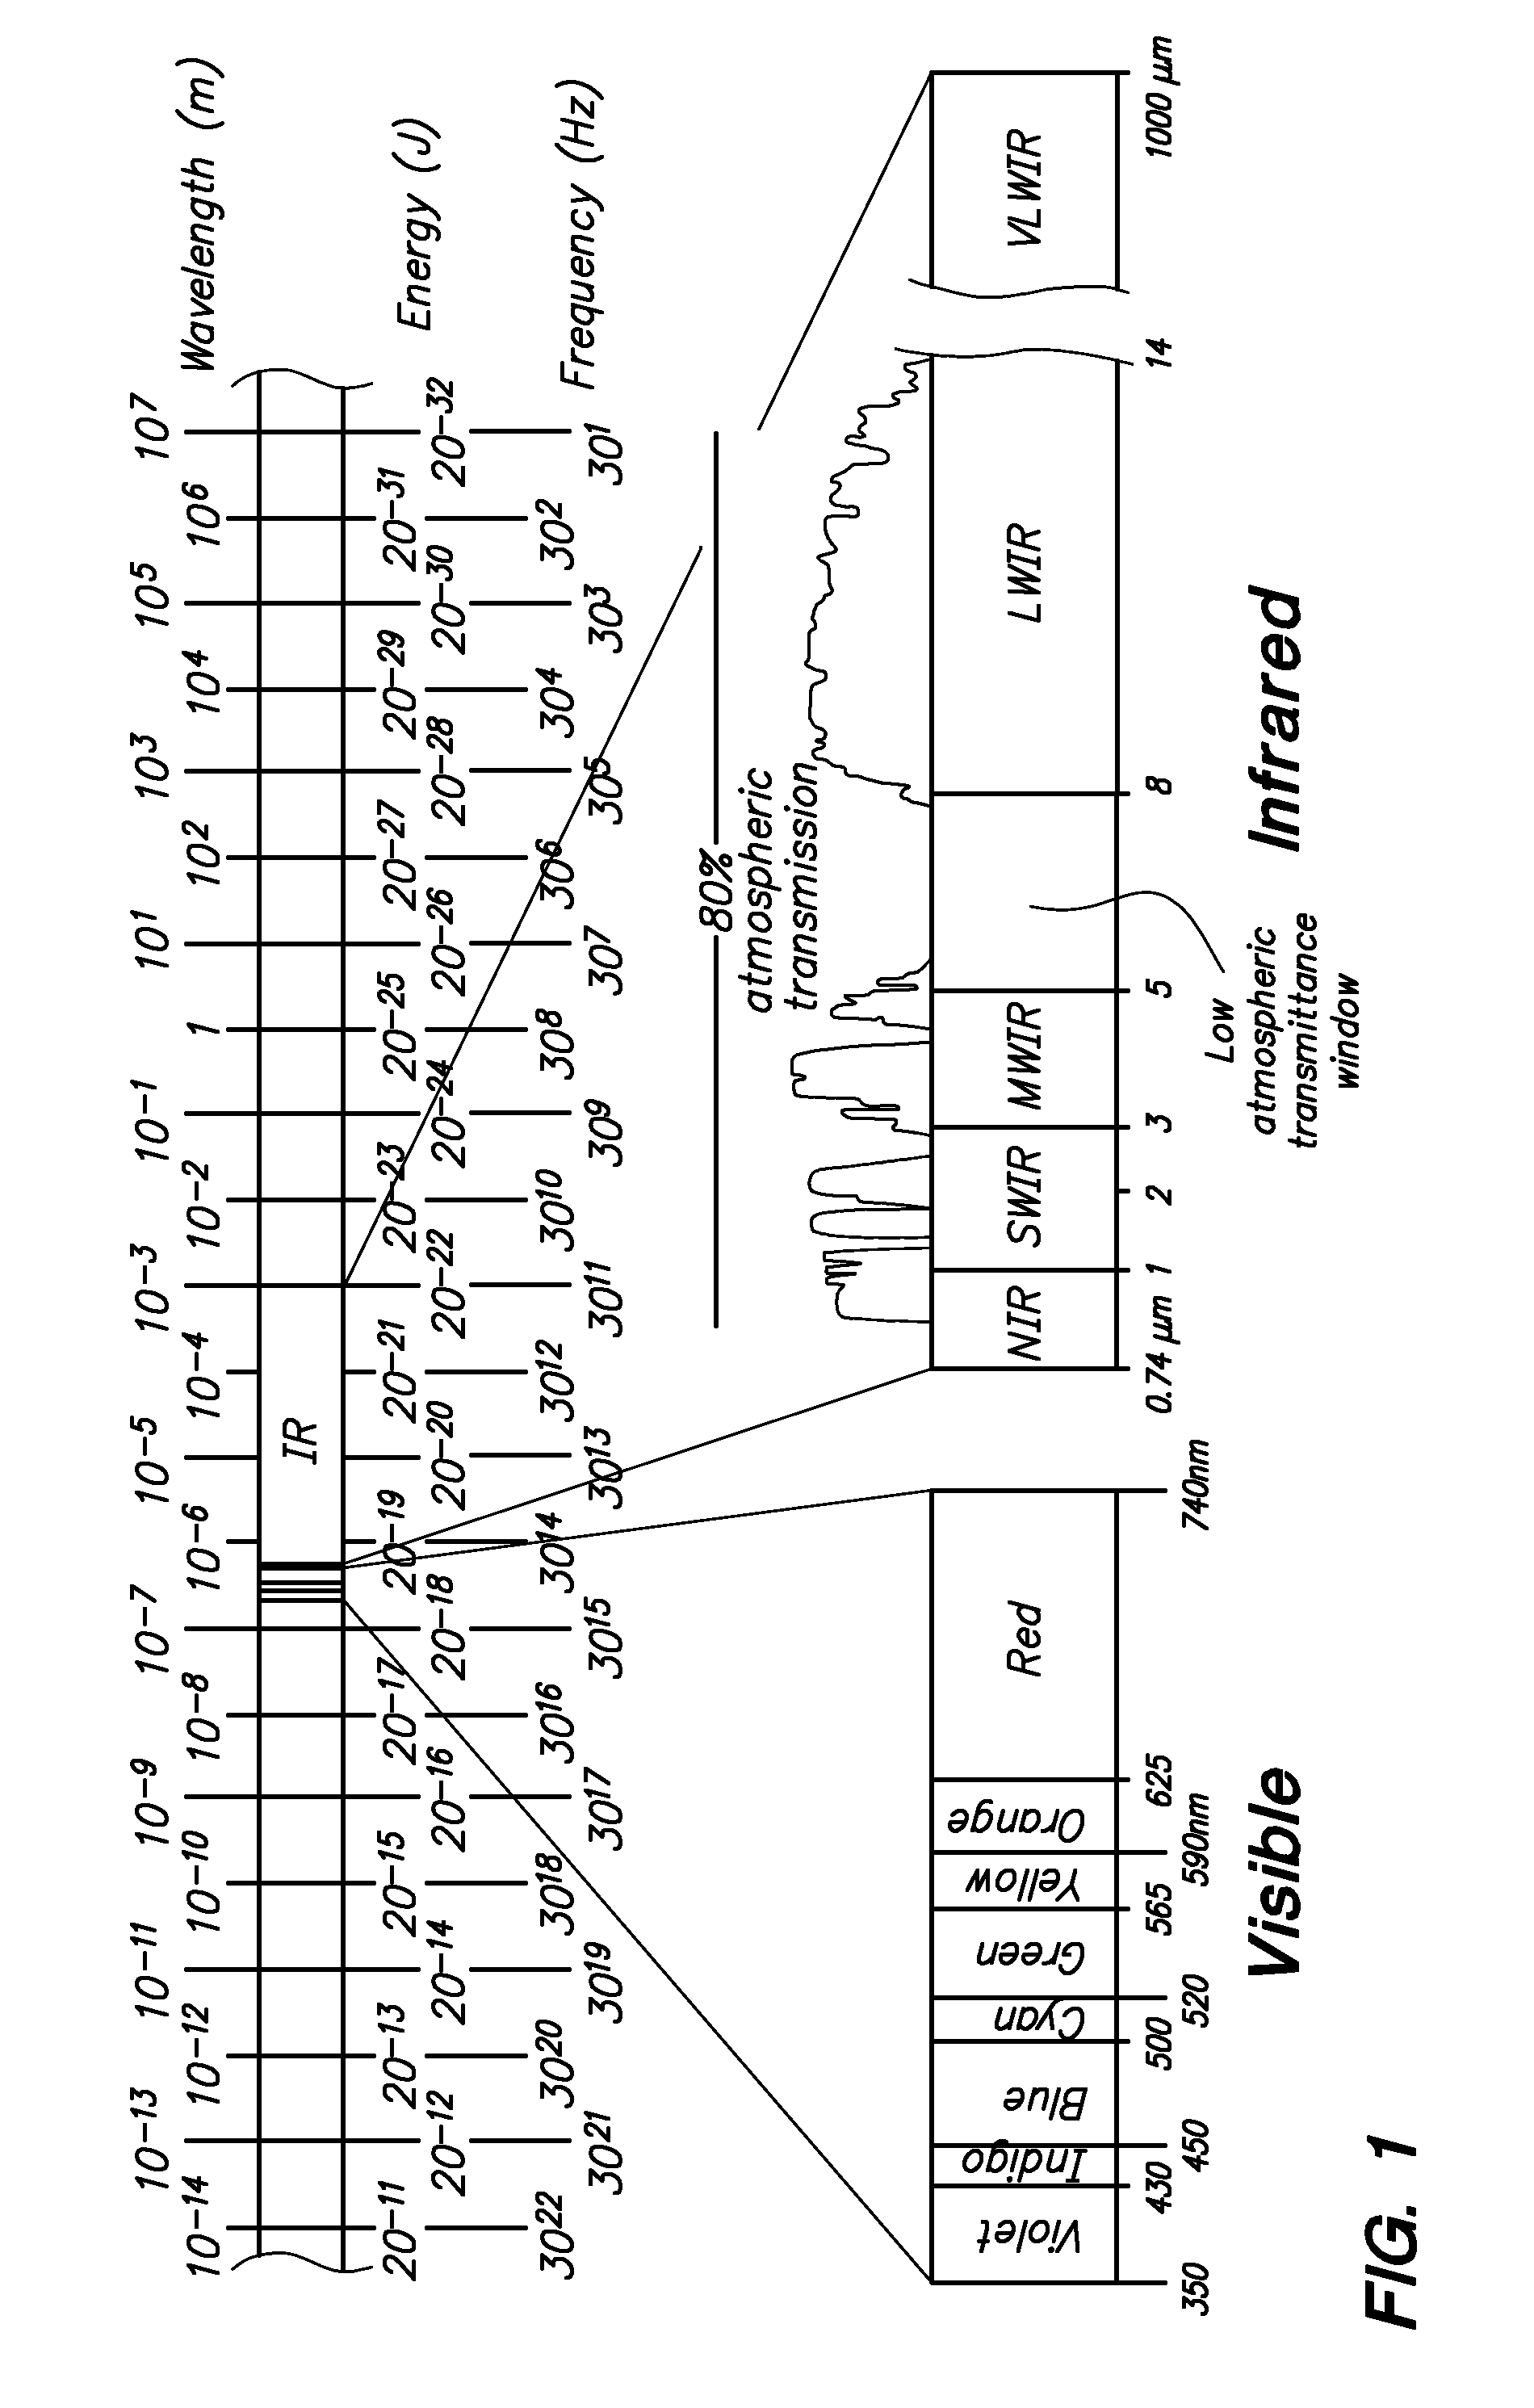 Method for detecting and mapping fires using features extracted from overhead imagery